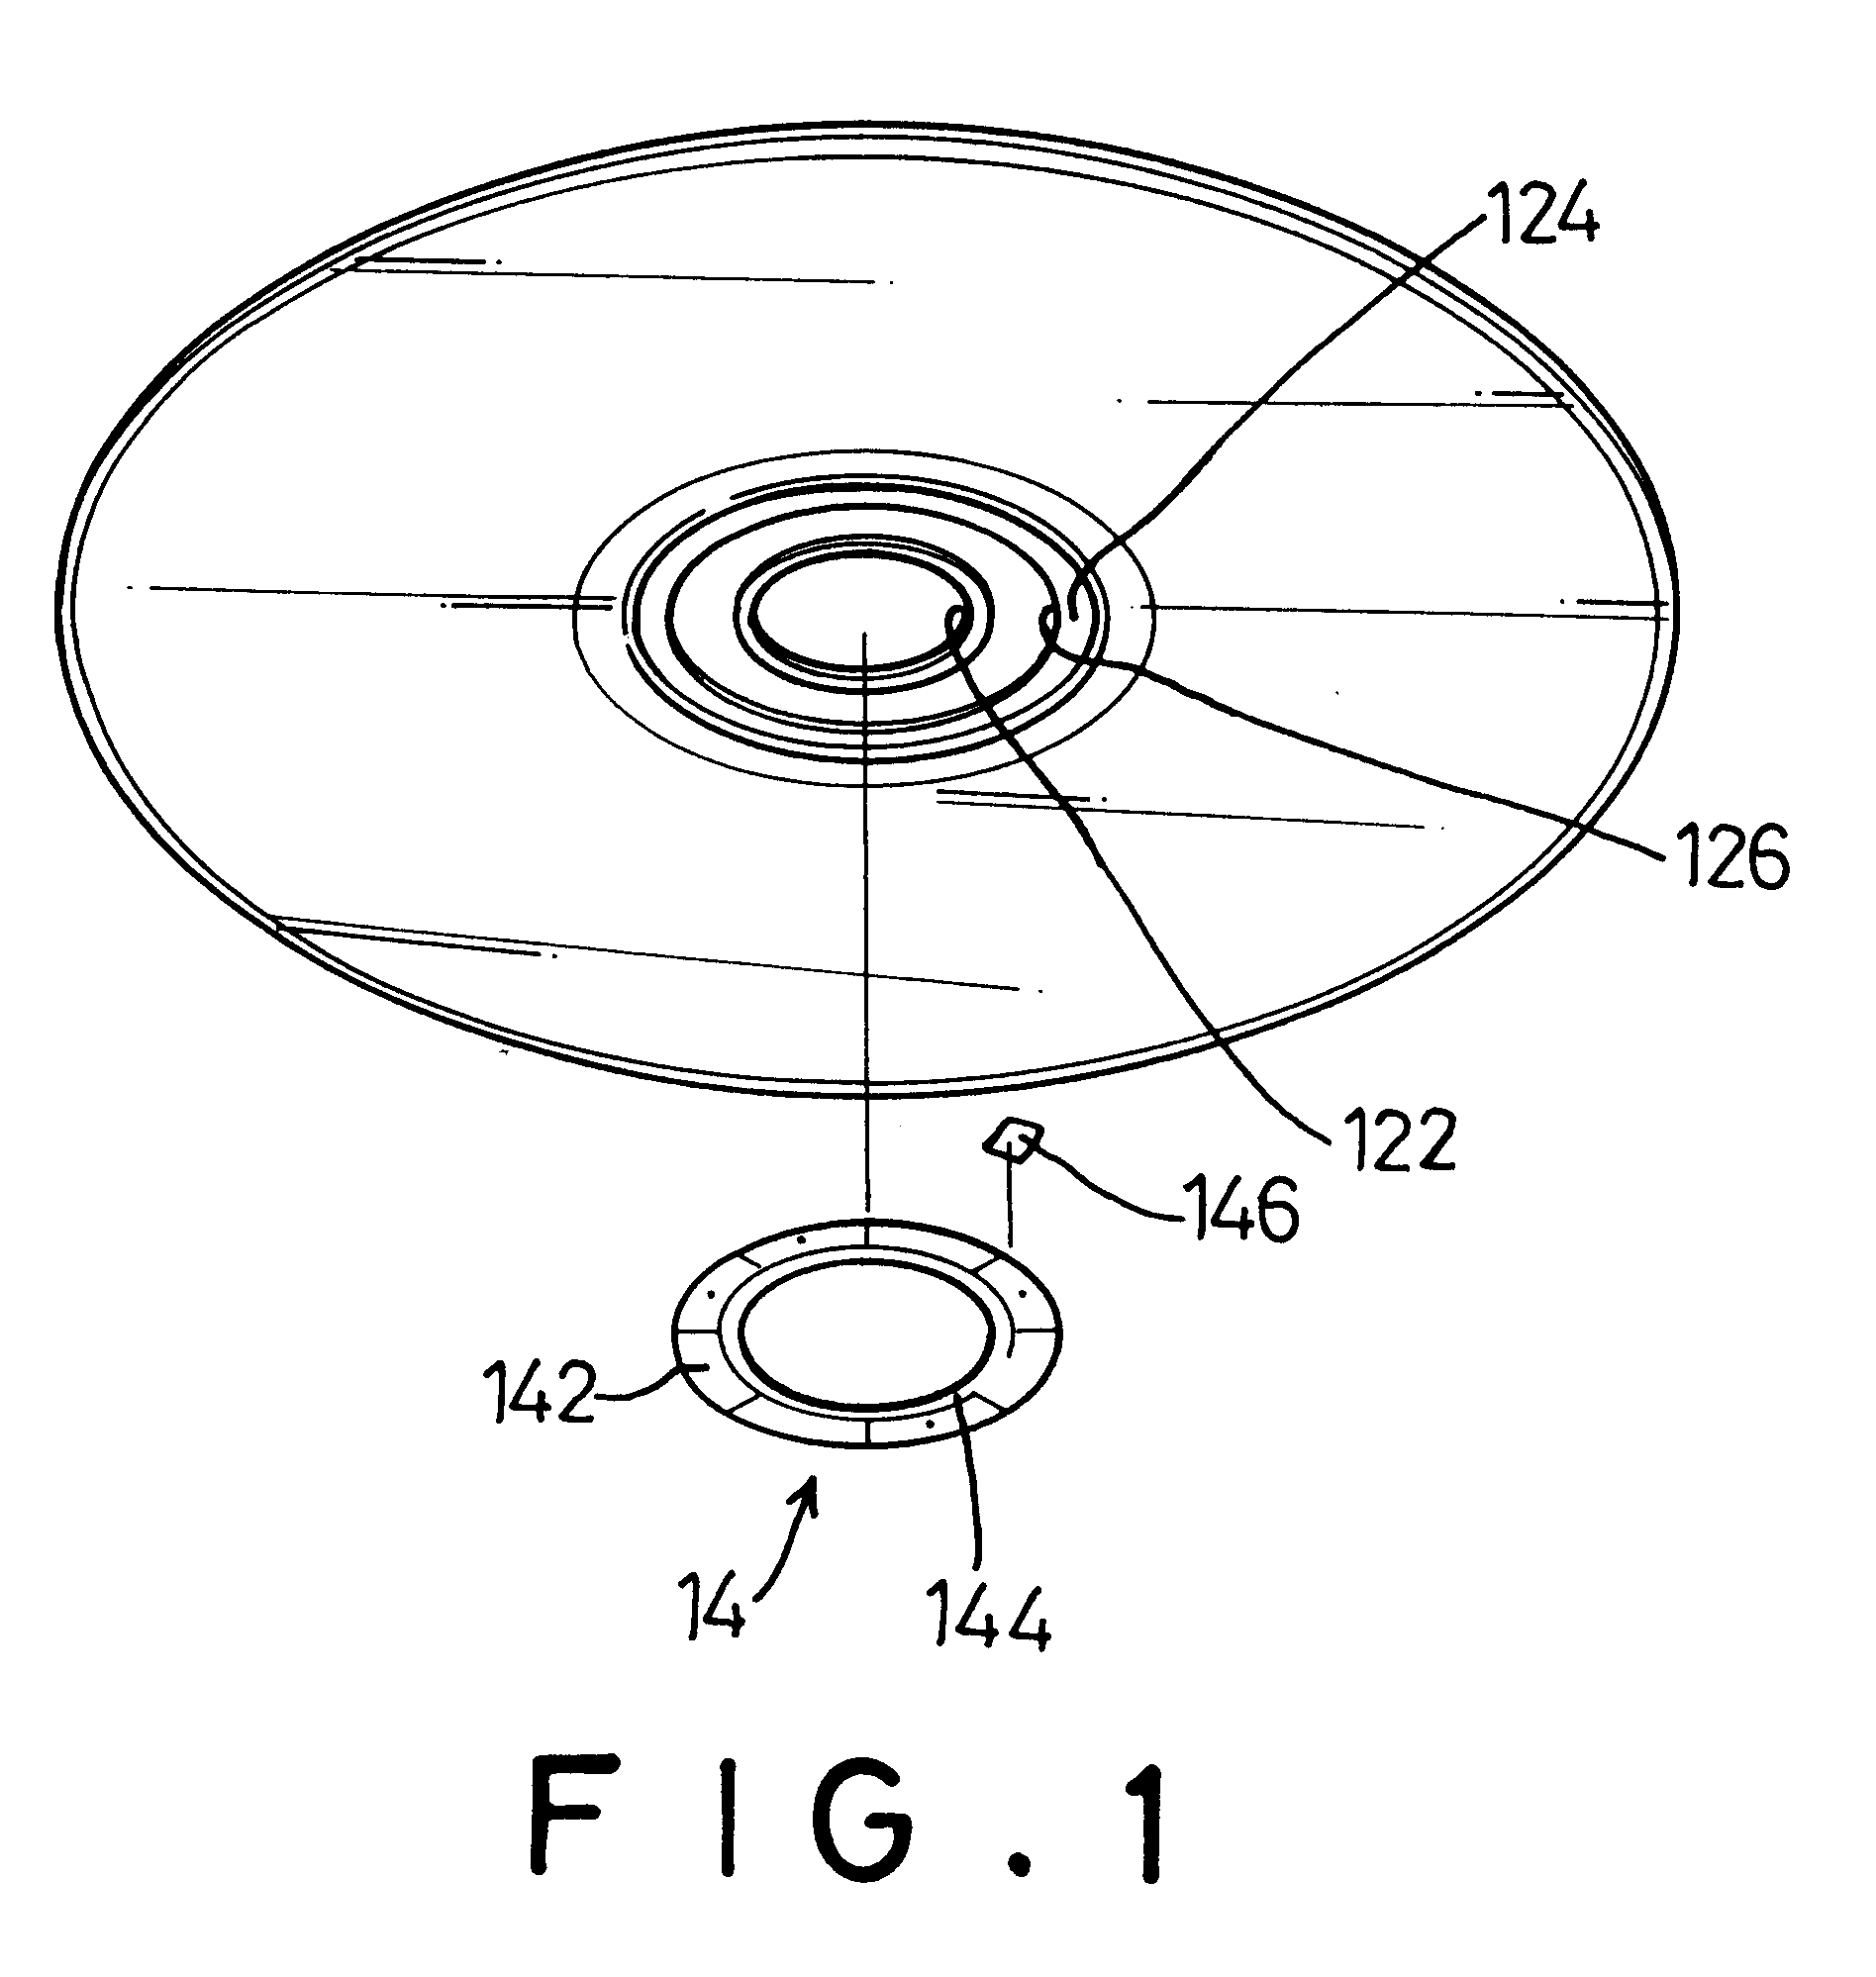 Optical disc with a control chip